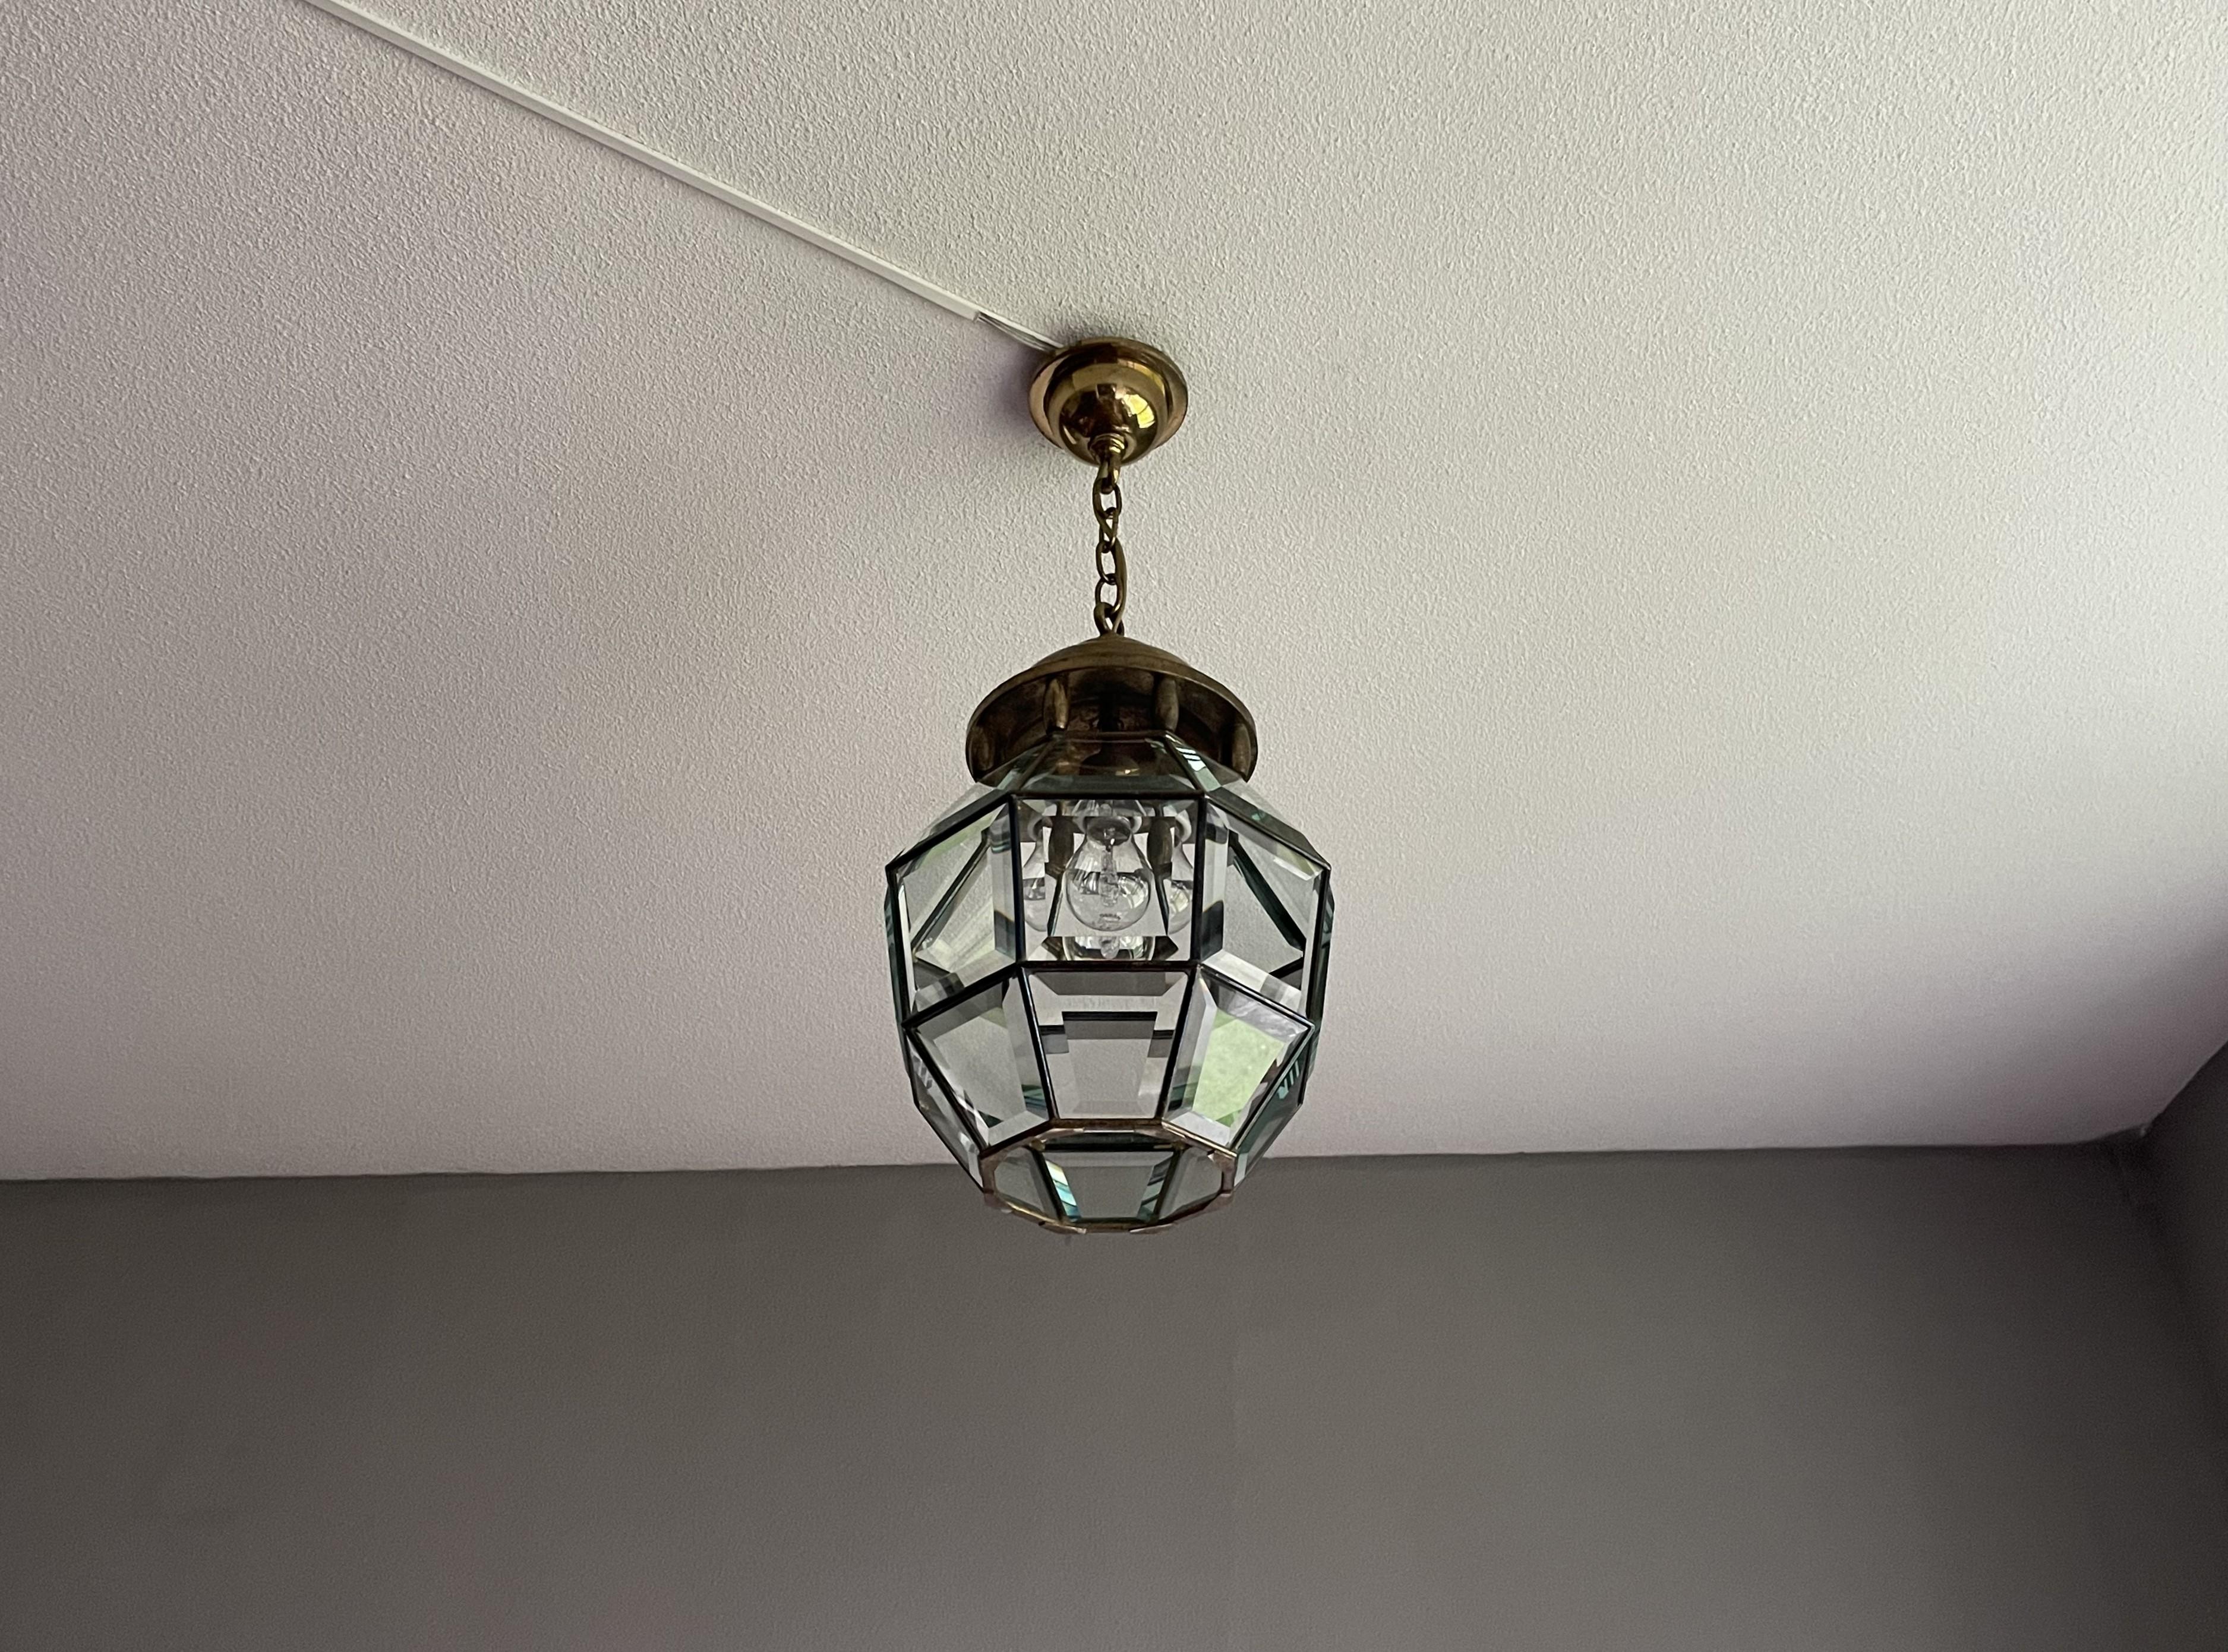 Beautiful, unique and all-handcrafted Arts & Crafts pendant light.

If you are looking for a stylish and all-handcrafted pendant to grace your hallway or landing then this early 20th century European work of lighting art could be perfect for you.